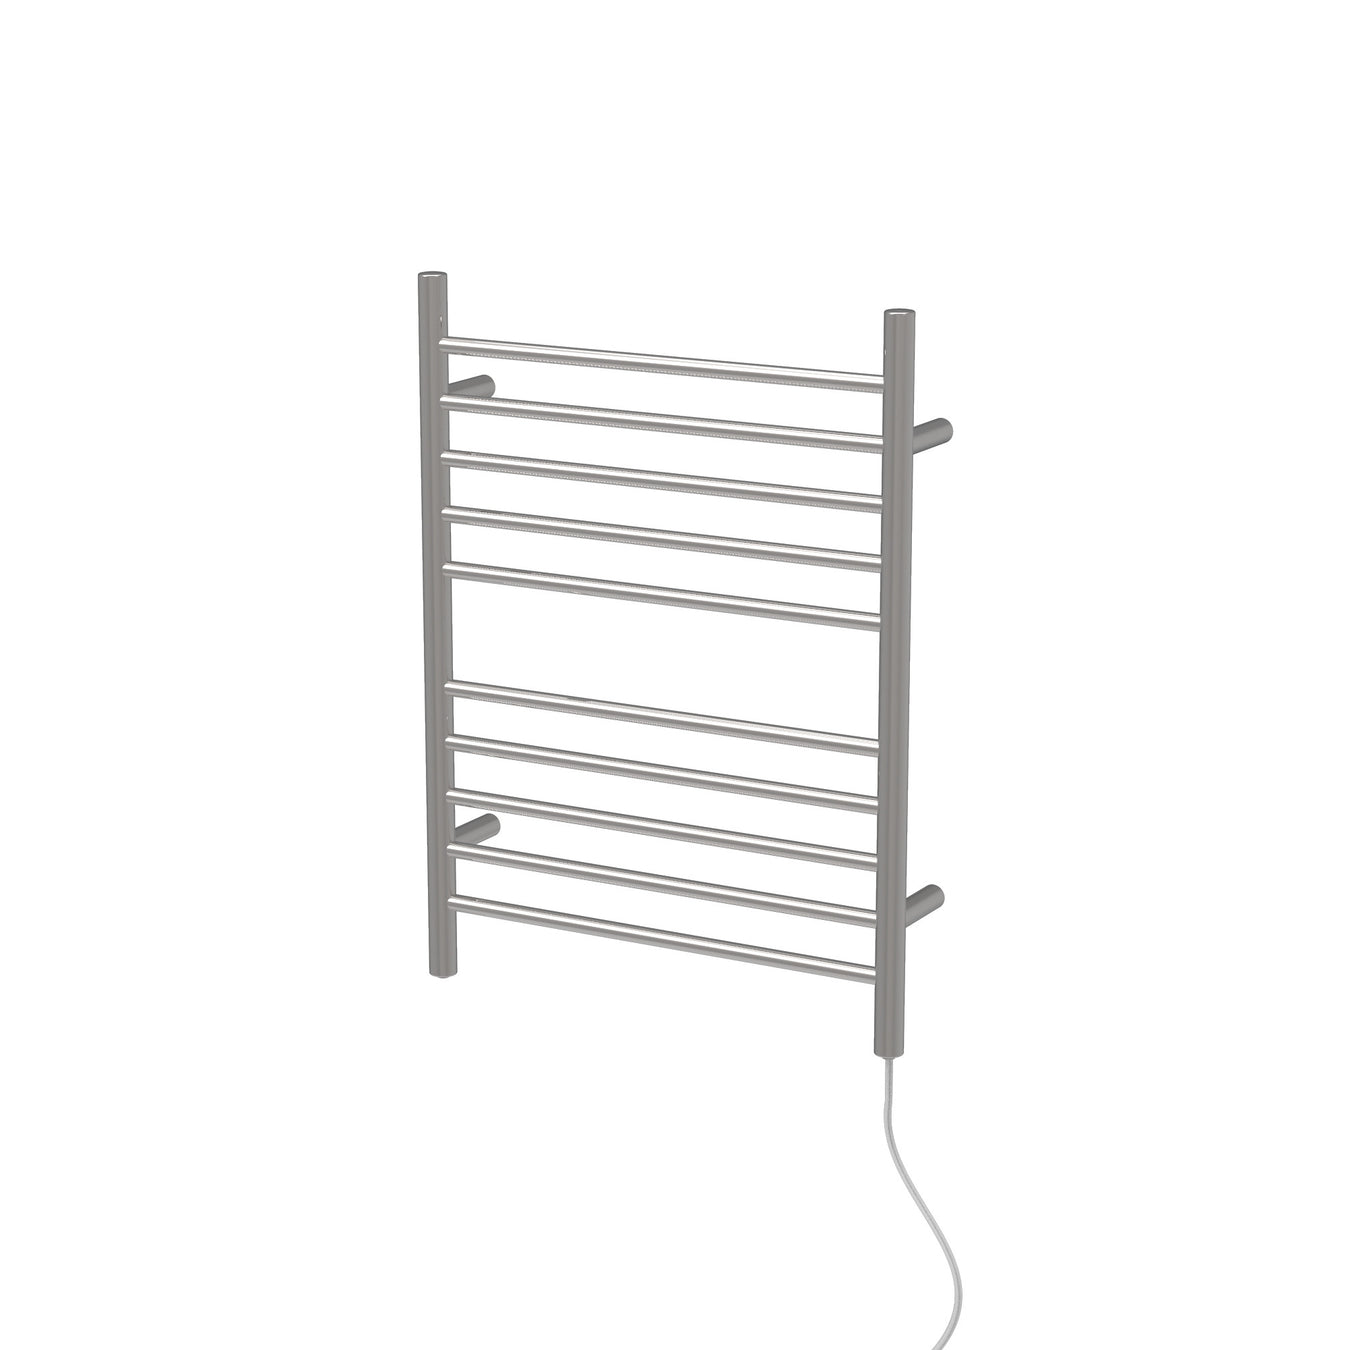 Amba Products Radiant Collection Plug-In Straight Towel Warmers